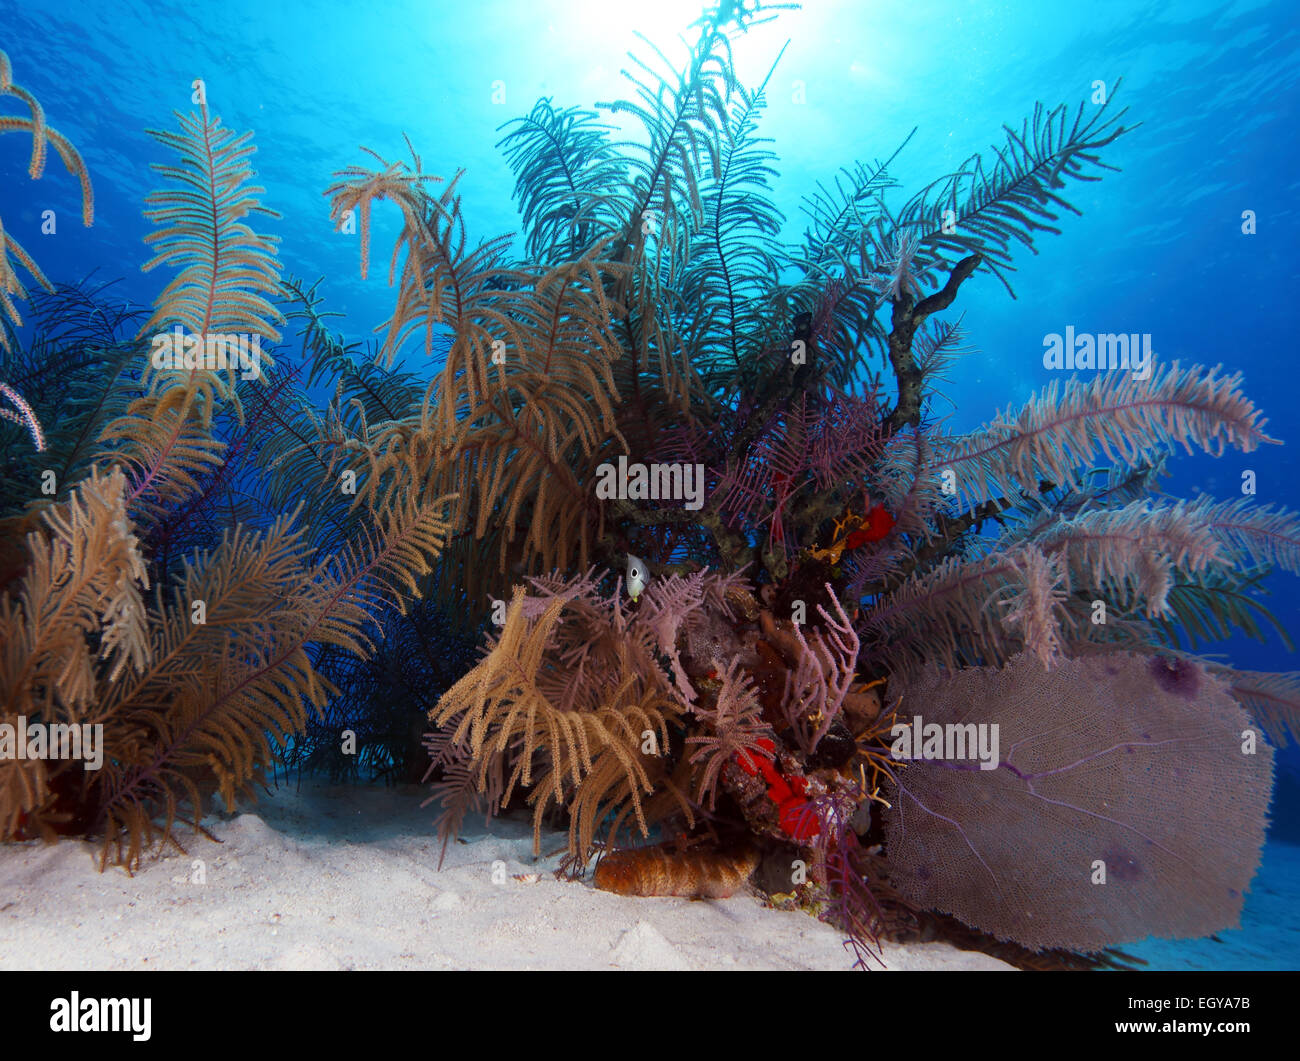 Colorful Underwater Coral Landscape of Caribbean Sea Stock Photo